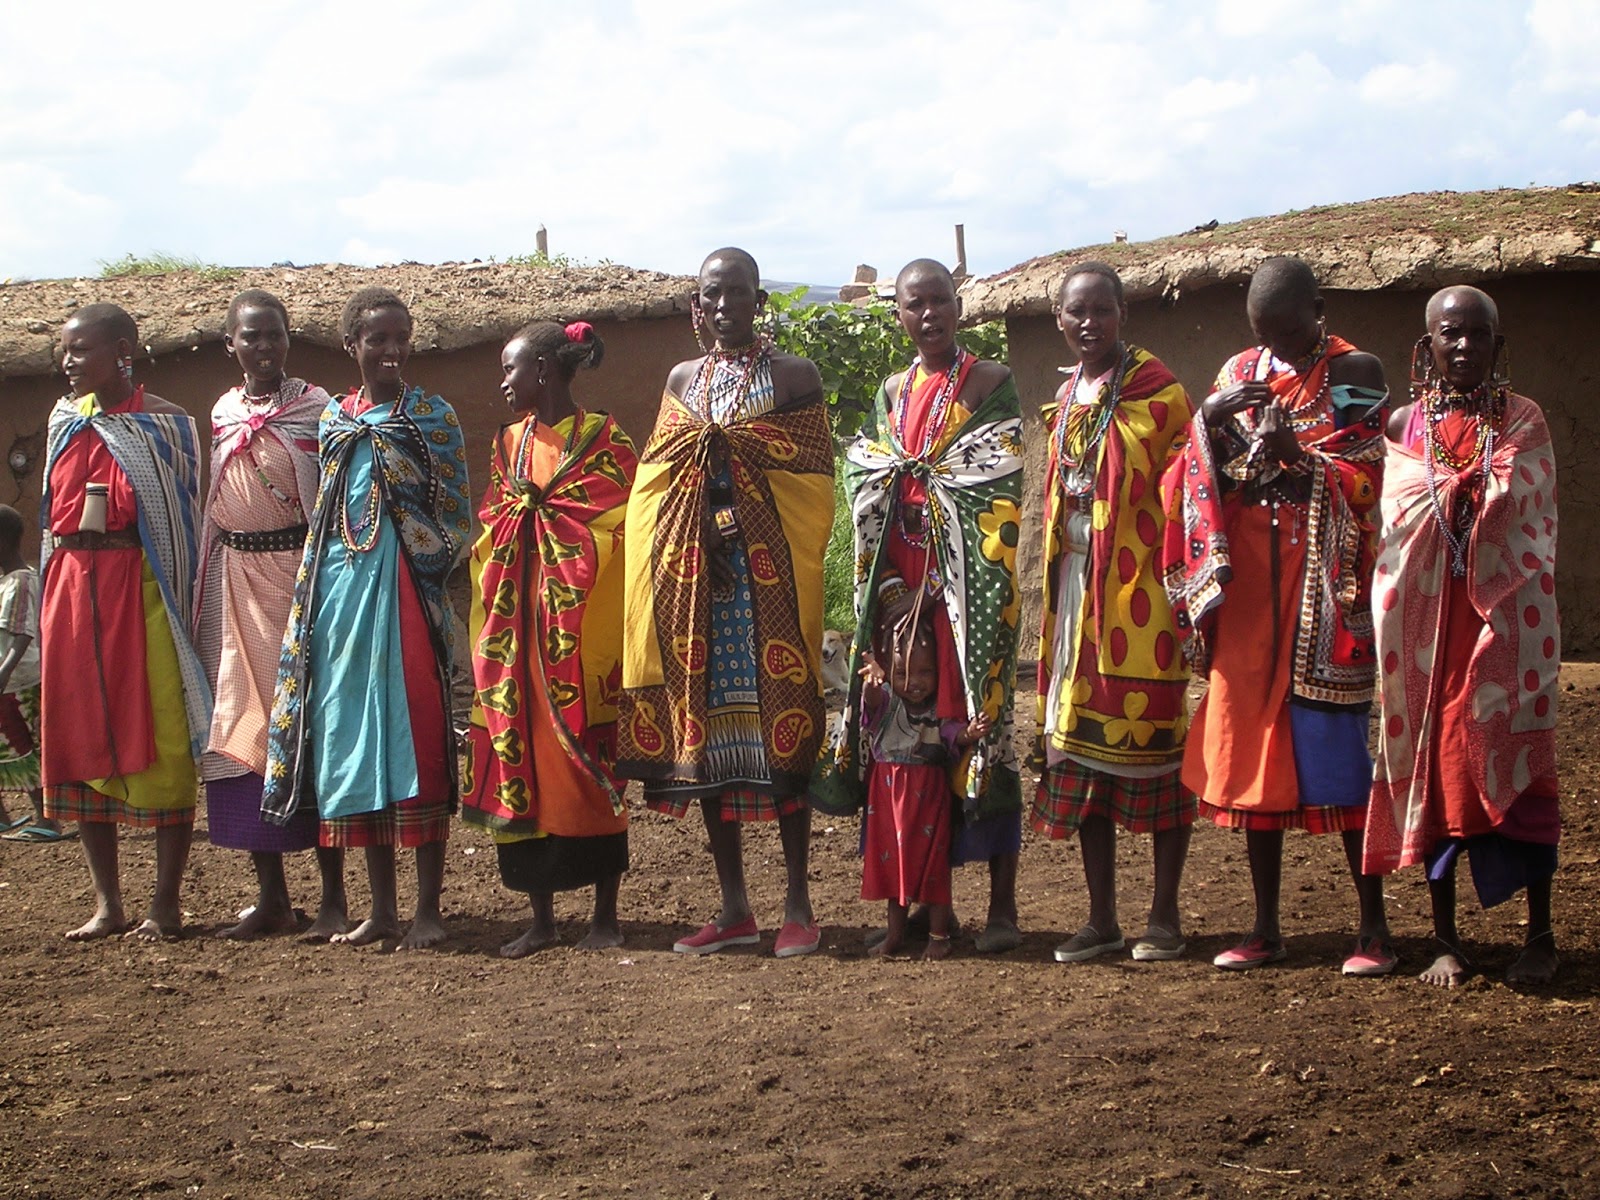 Culture Holiday Tour: Zulu Tribe Women Clothing in South Africa